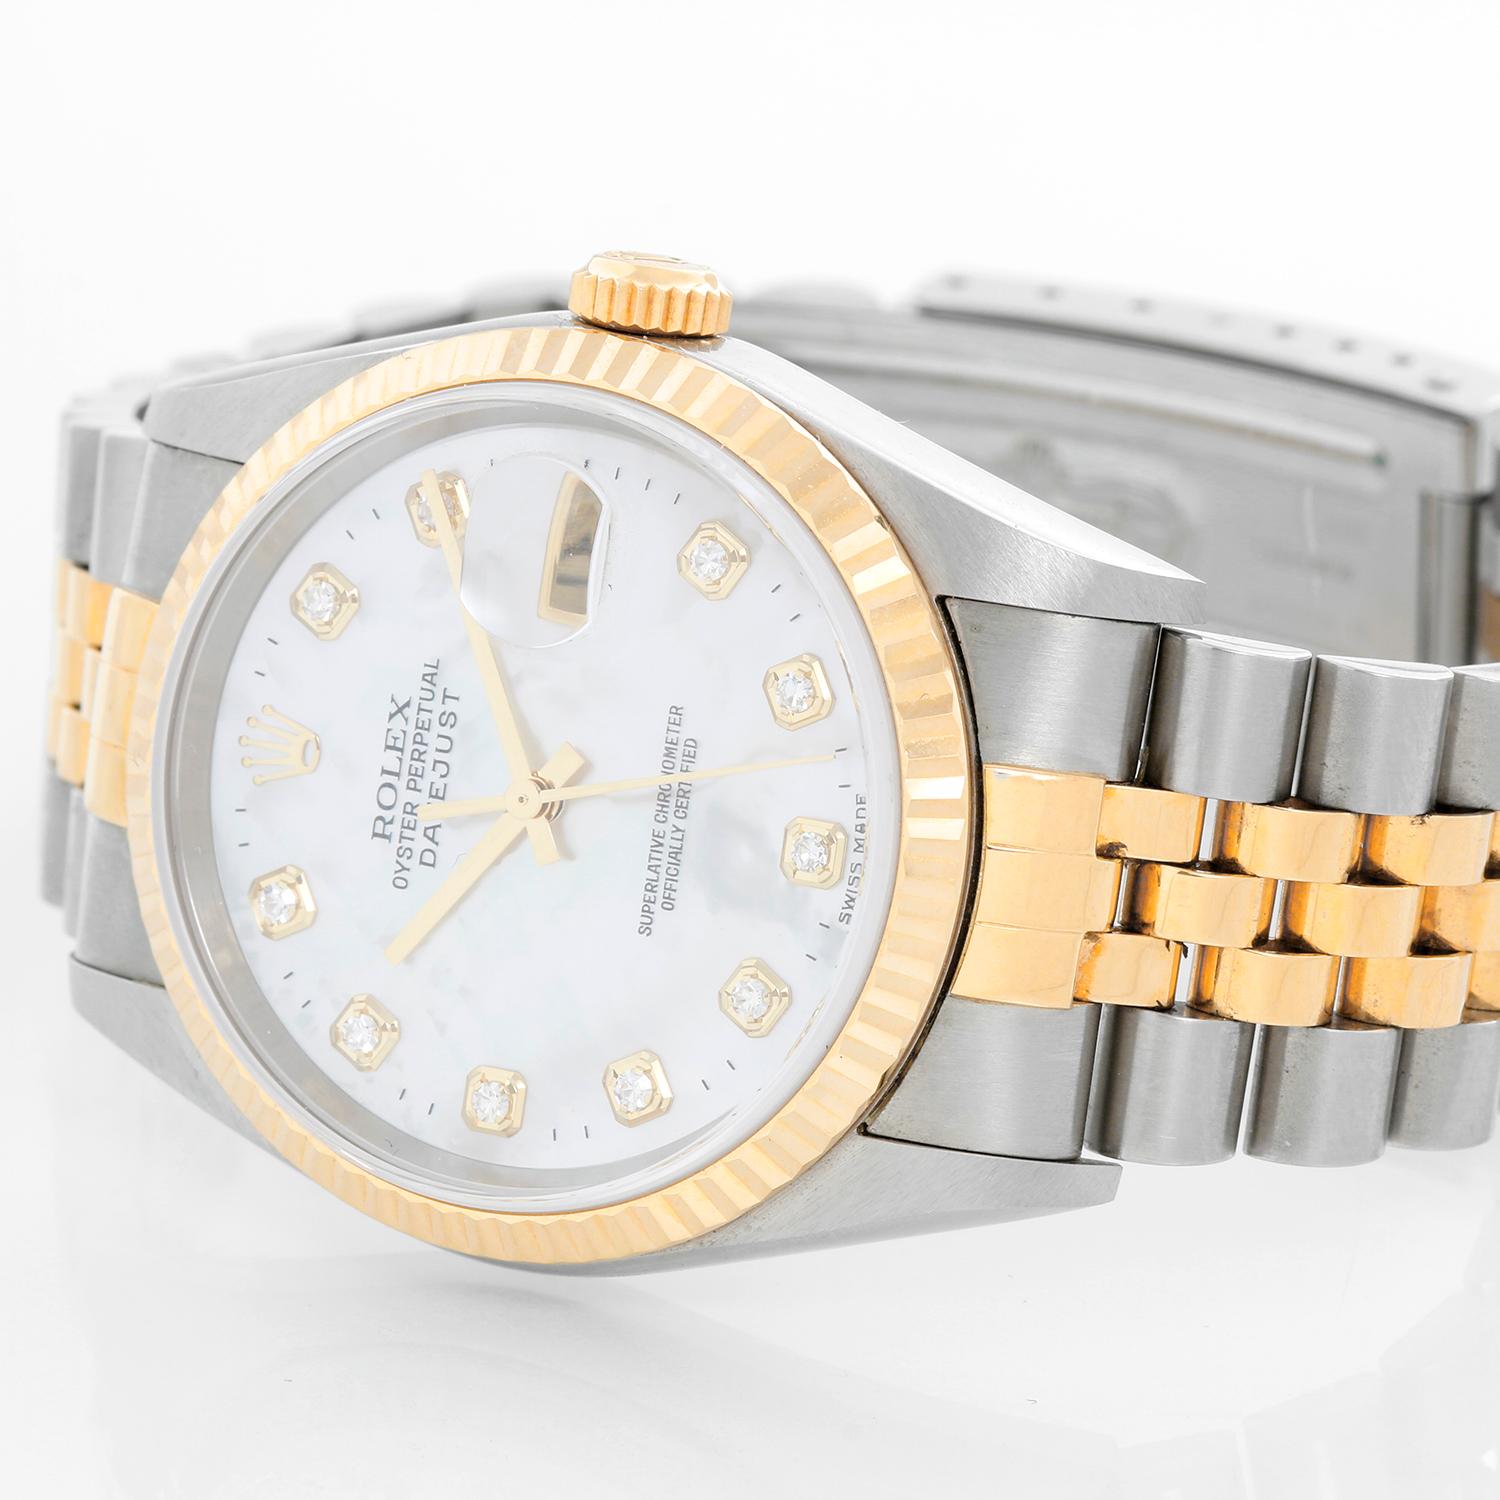 Rolex Men's Two Tone Datejust 16233 - Automatic winding, Quickset, sapphire crystal. Stainless steel case with yellow gold bezel (36mm diameter). Factory Mother of Pearl Diamond dial. Stainless steel and 18k yellow gold Jubilee bracelet. Pre-owned